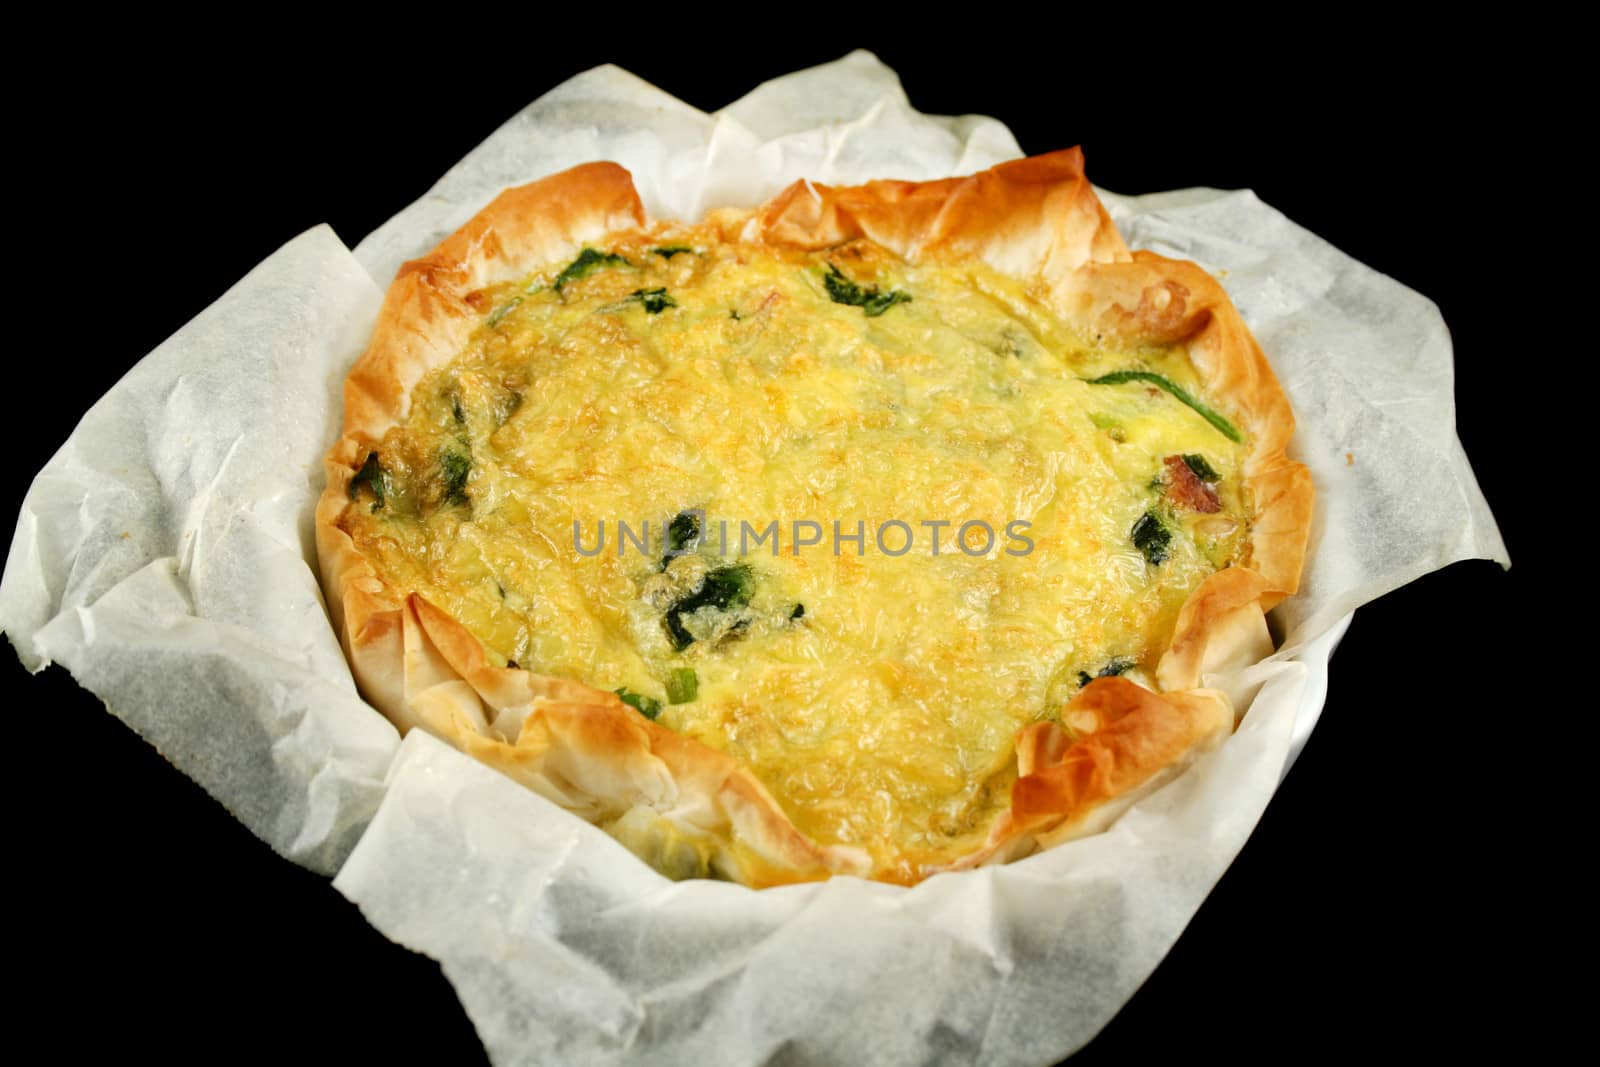 Freshly baked spinach and bacon quiche straight from the oven.